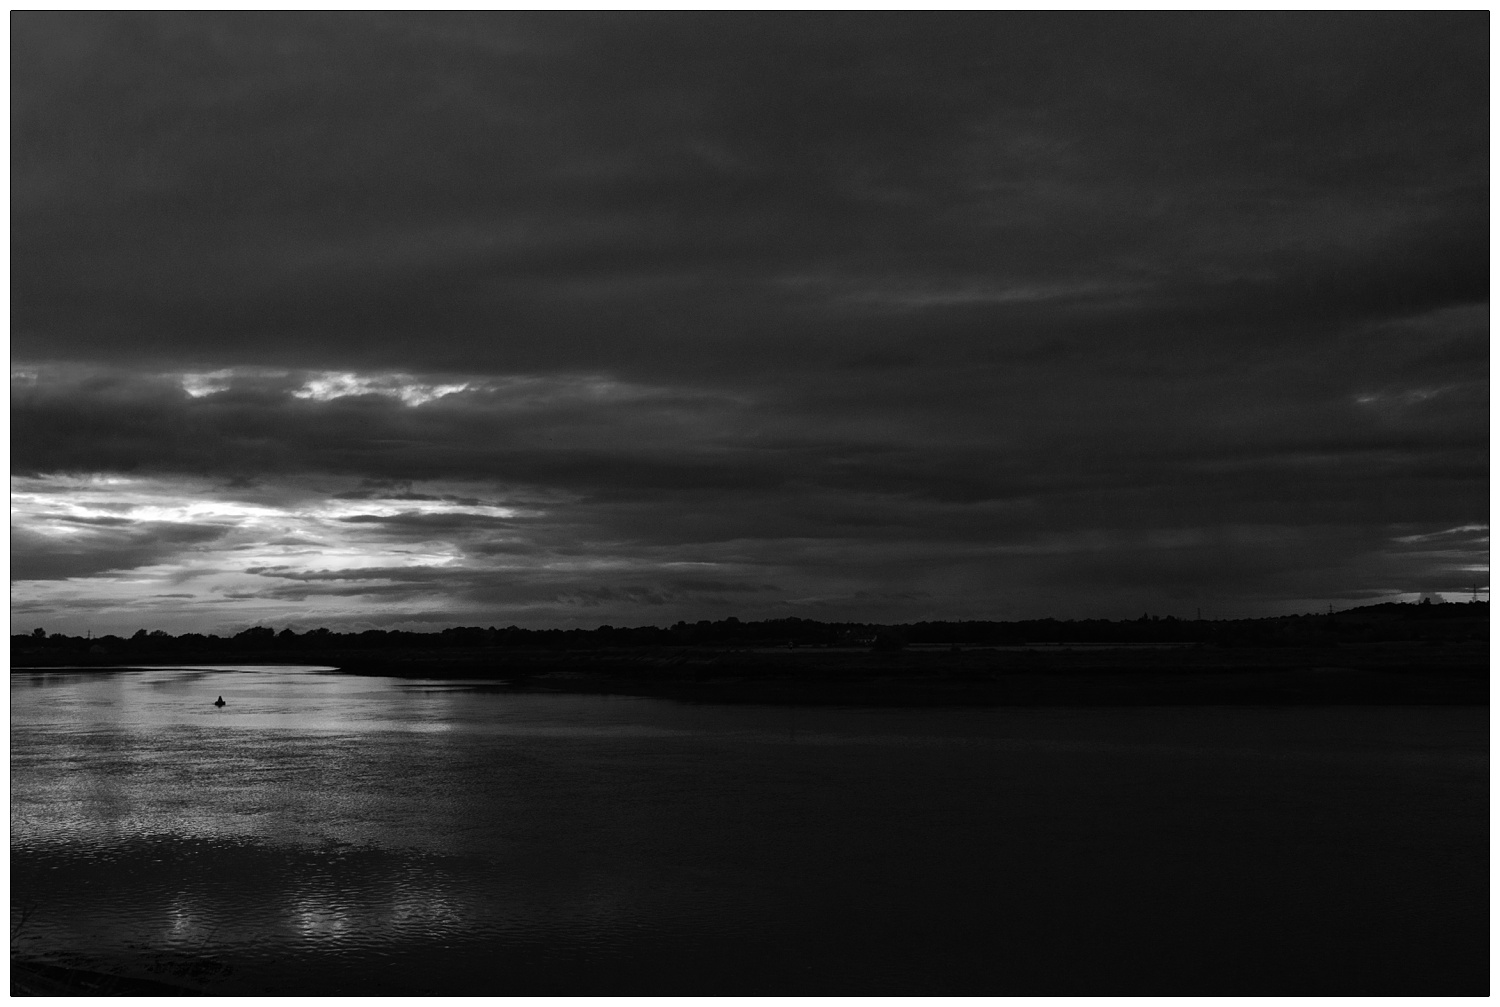 A evening photograph taken from the Brandy Hole overlooking the River Crouch. South Woodham Ferrers is across the river. A gap of light in the clouds is reflected in the river. A black and white Essex landscape photograph.